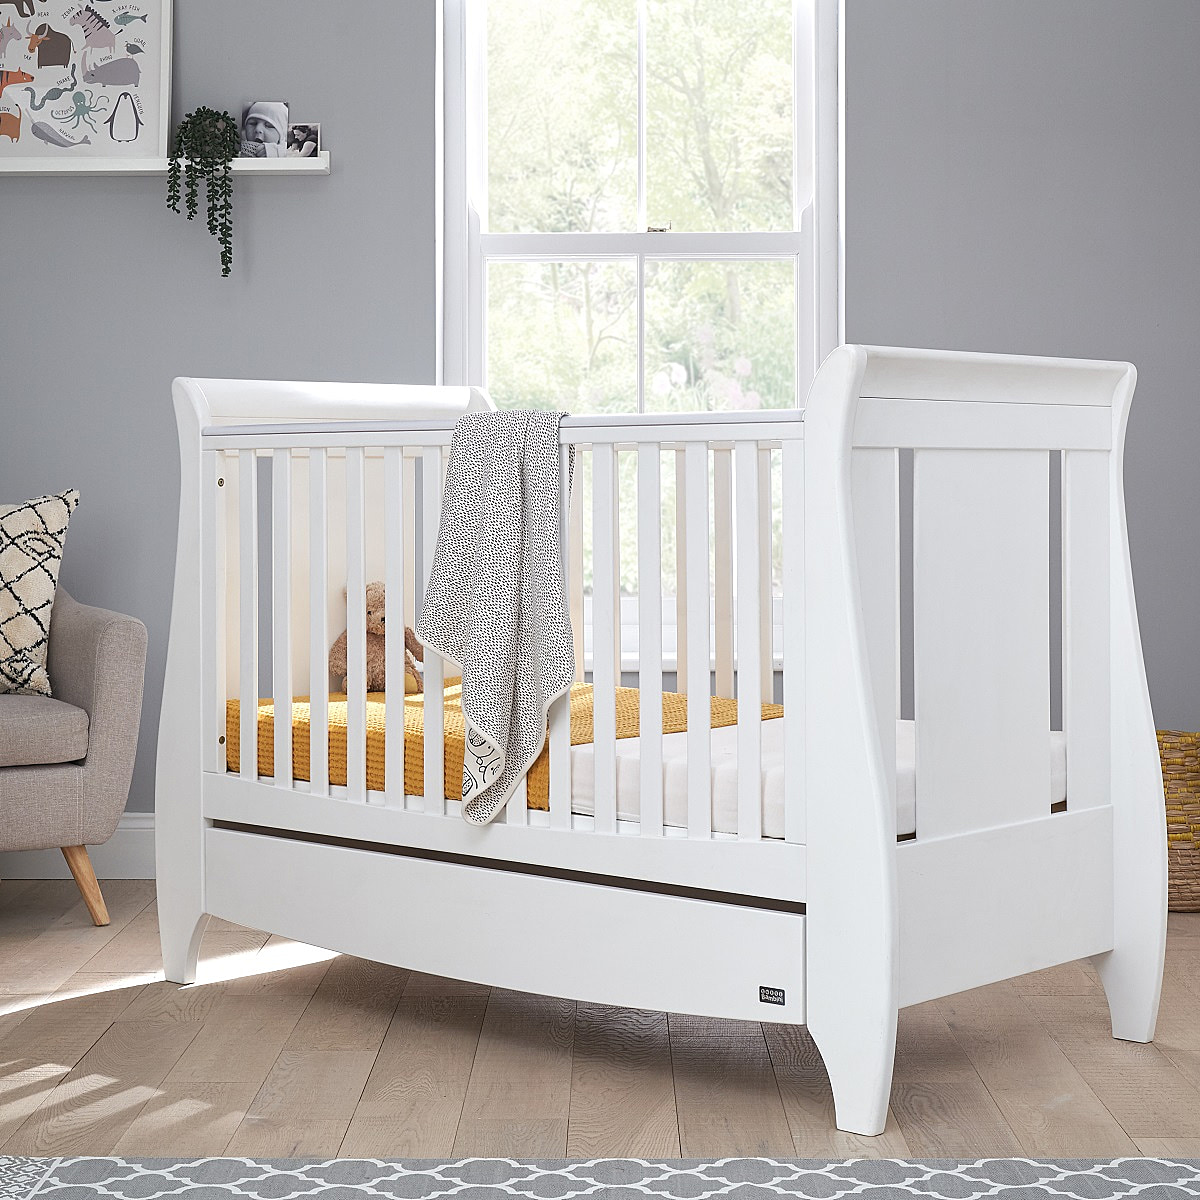 Lucas Sleigh 20 in 20 Cot Bed with Under Bed Drawer